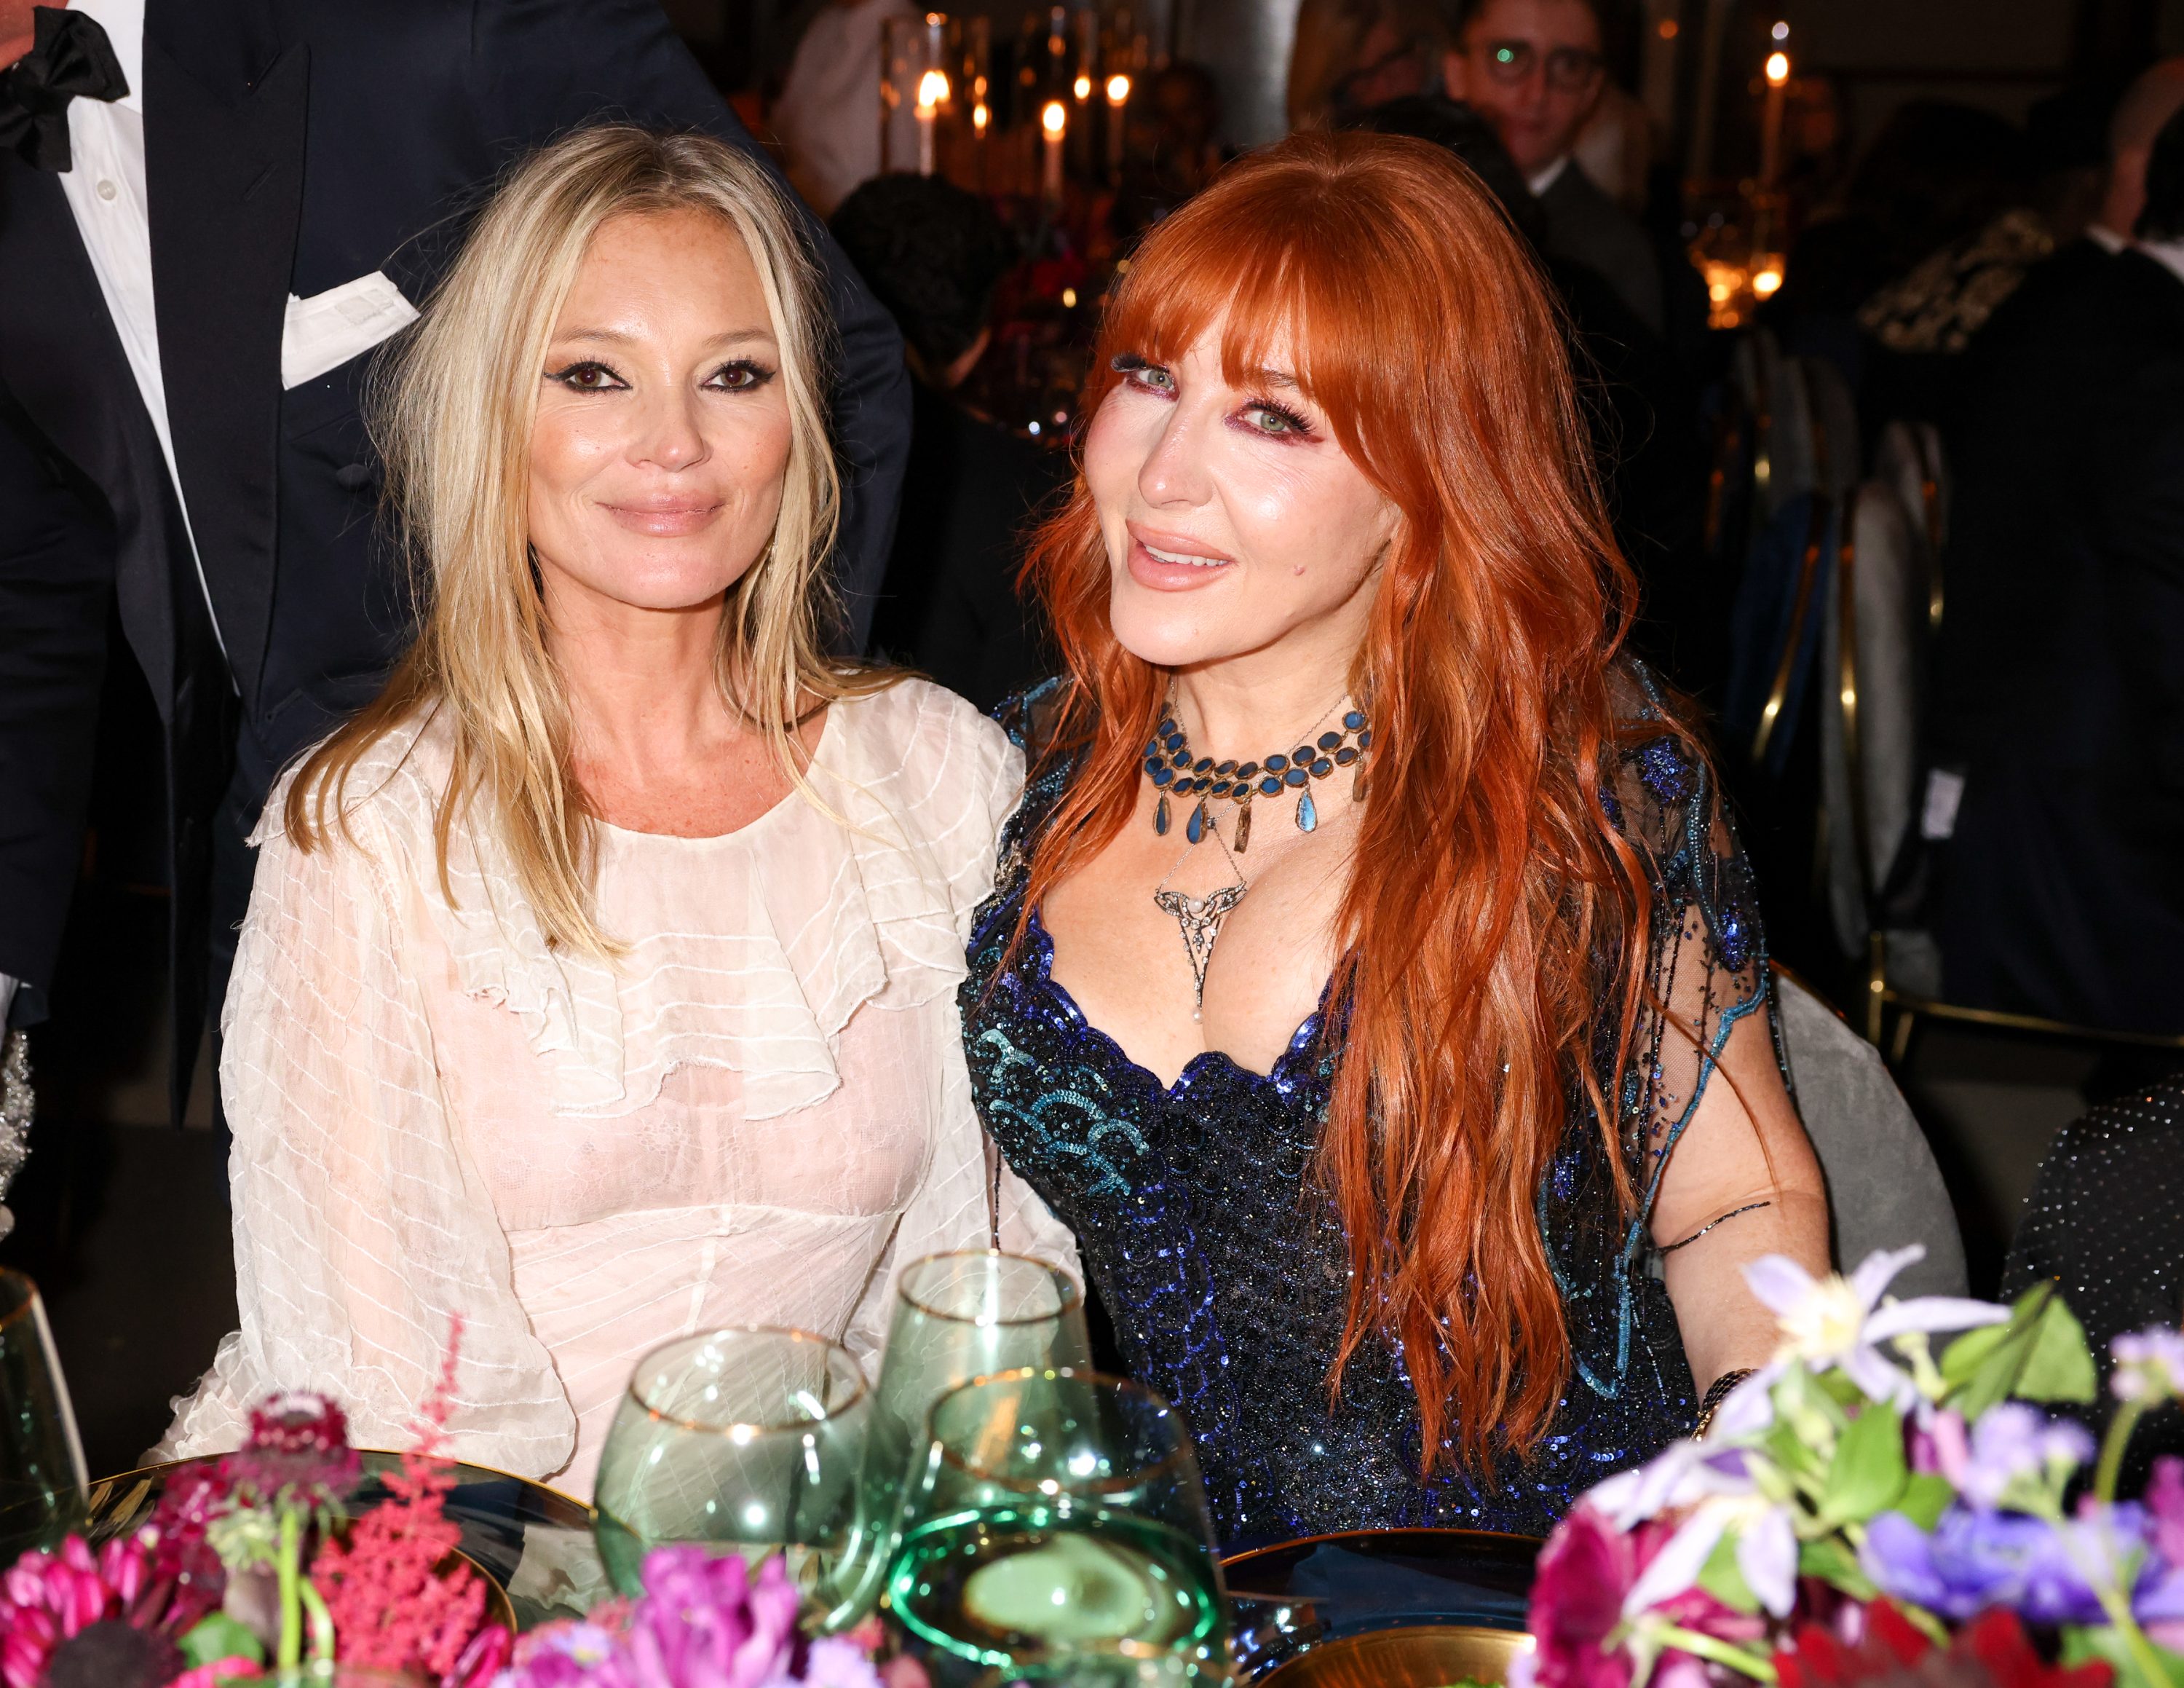 Kate Moss Charlotte Tilbury The Clooney Foundation For Justice, Albie Awards Gala